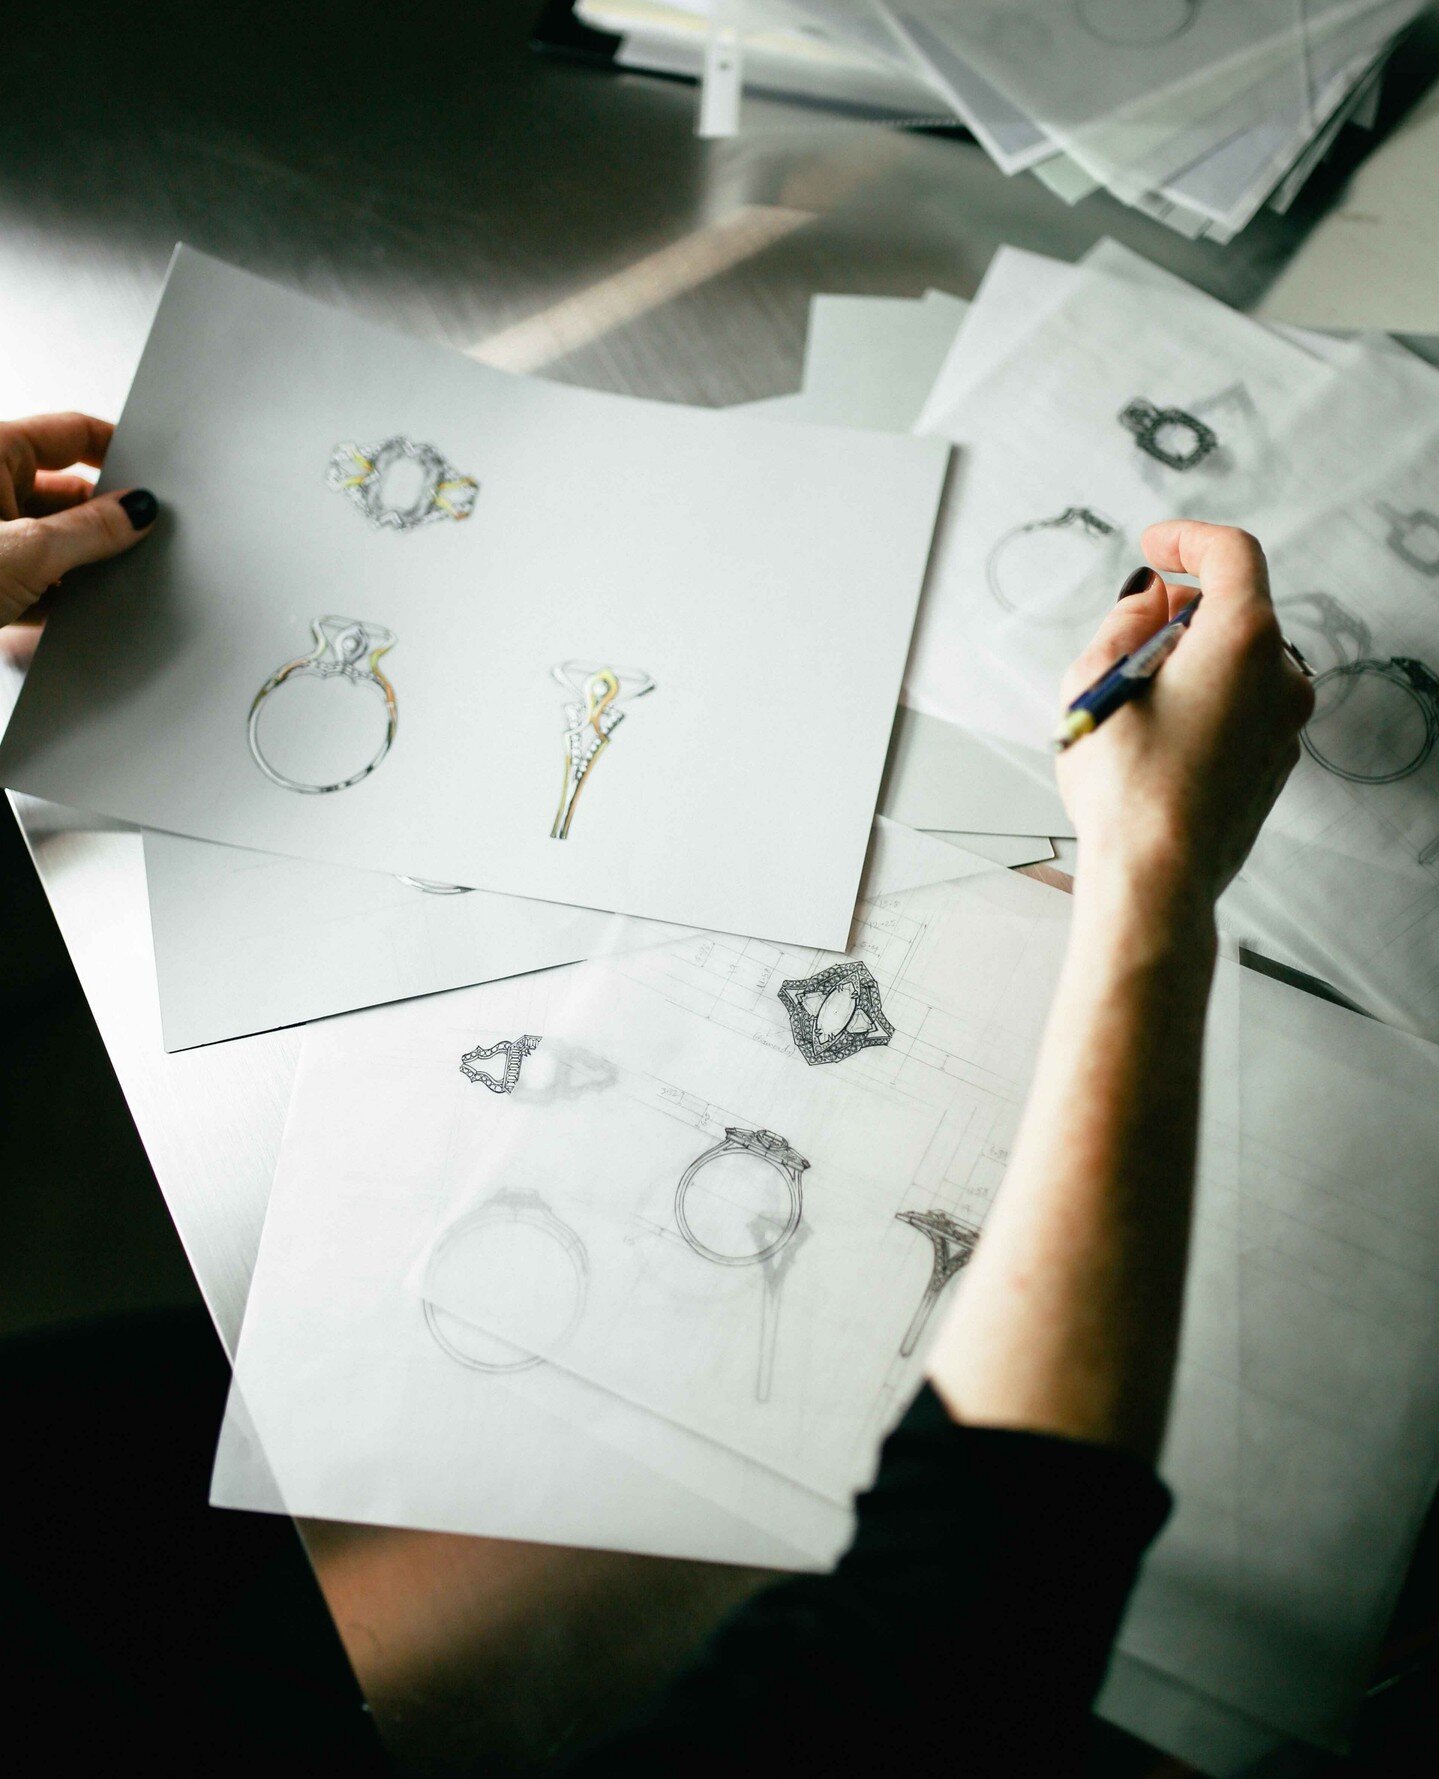 The Central Saint Martins (CSM) Short Course Jewellery Programme is back, and we have some fantastic updates to share with you! Starting in October, we are introducing a brand-new fully online option, open to passionate individuals from all corners o